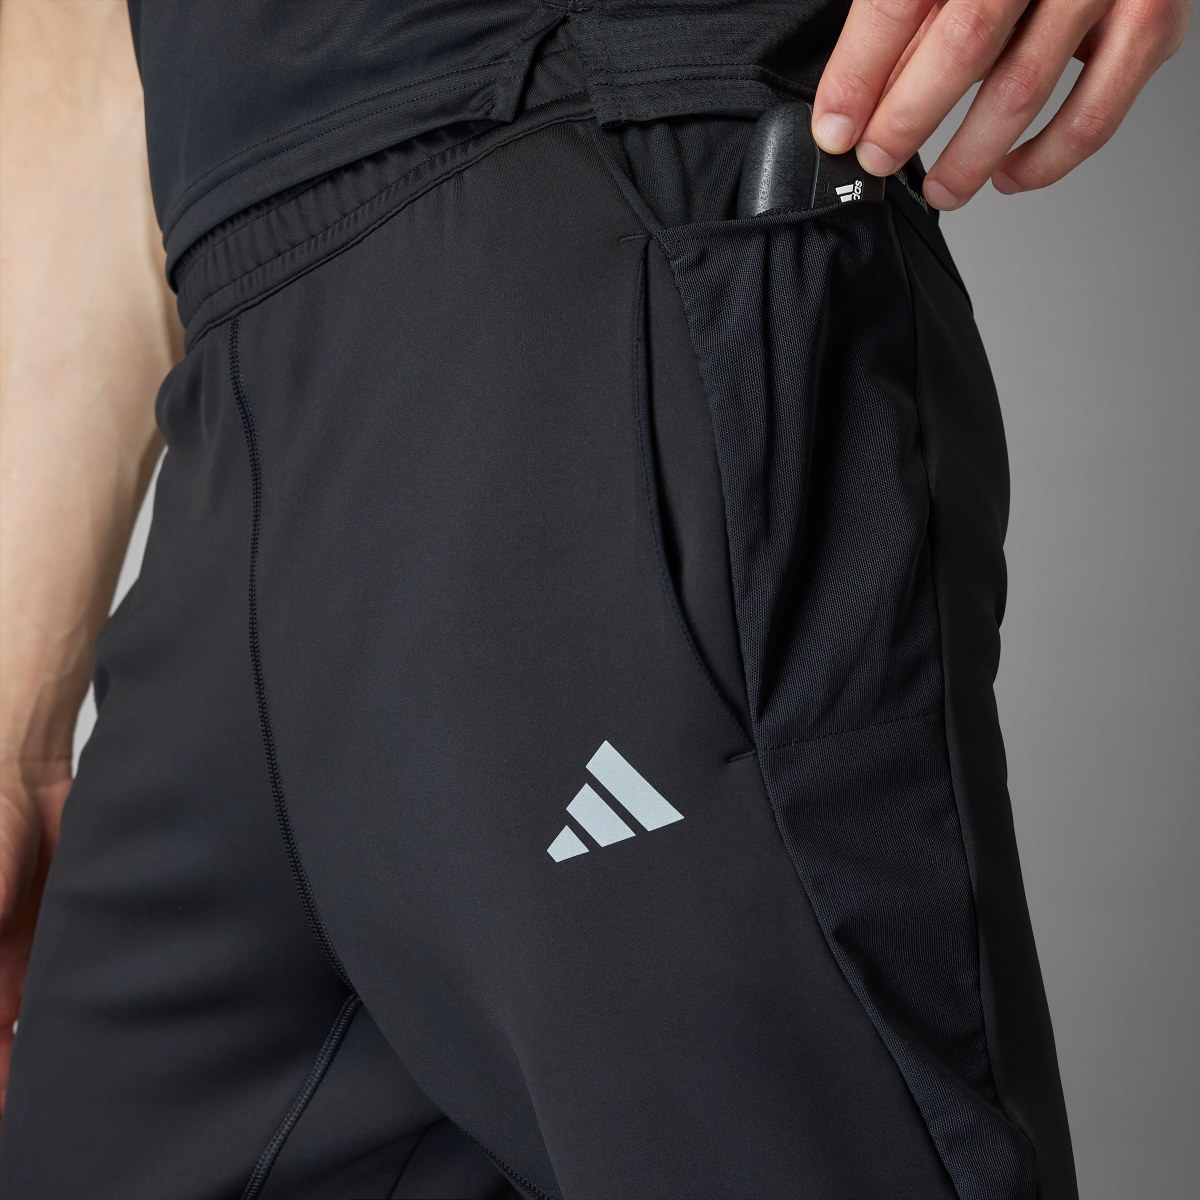 Adidas Own the Run Astro Knit Joggers. 7